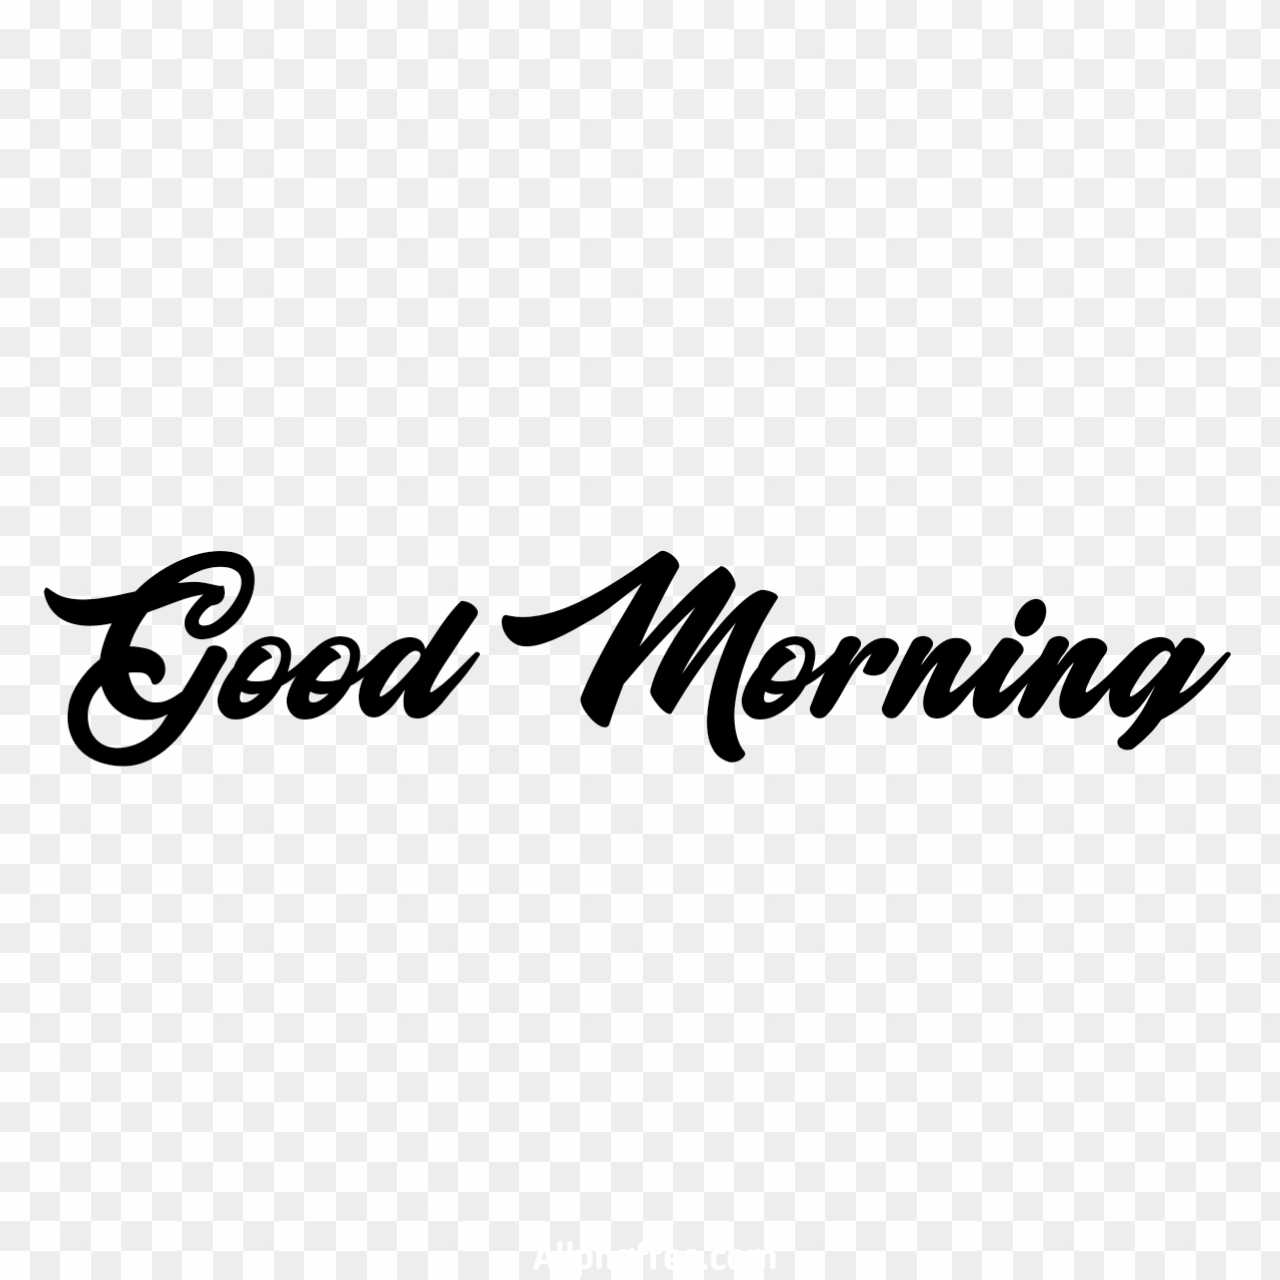 Stylist good morning text PNG with black colour